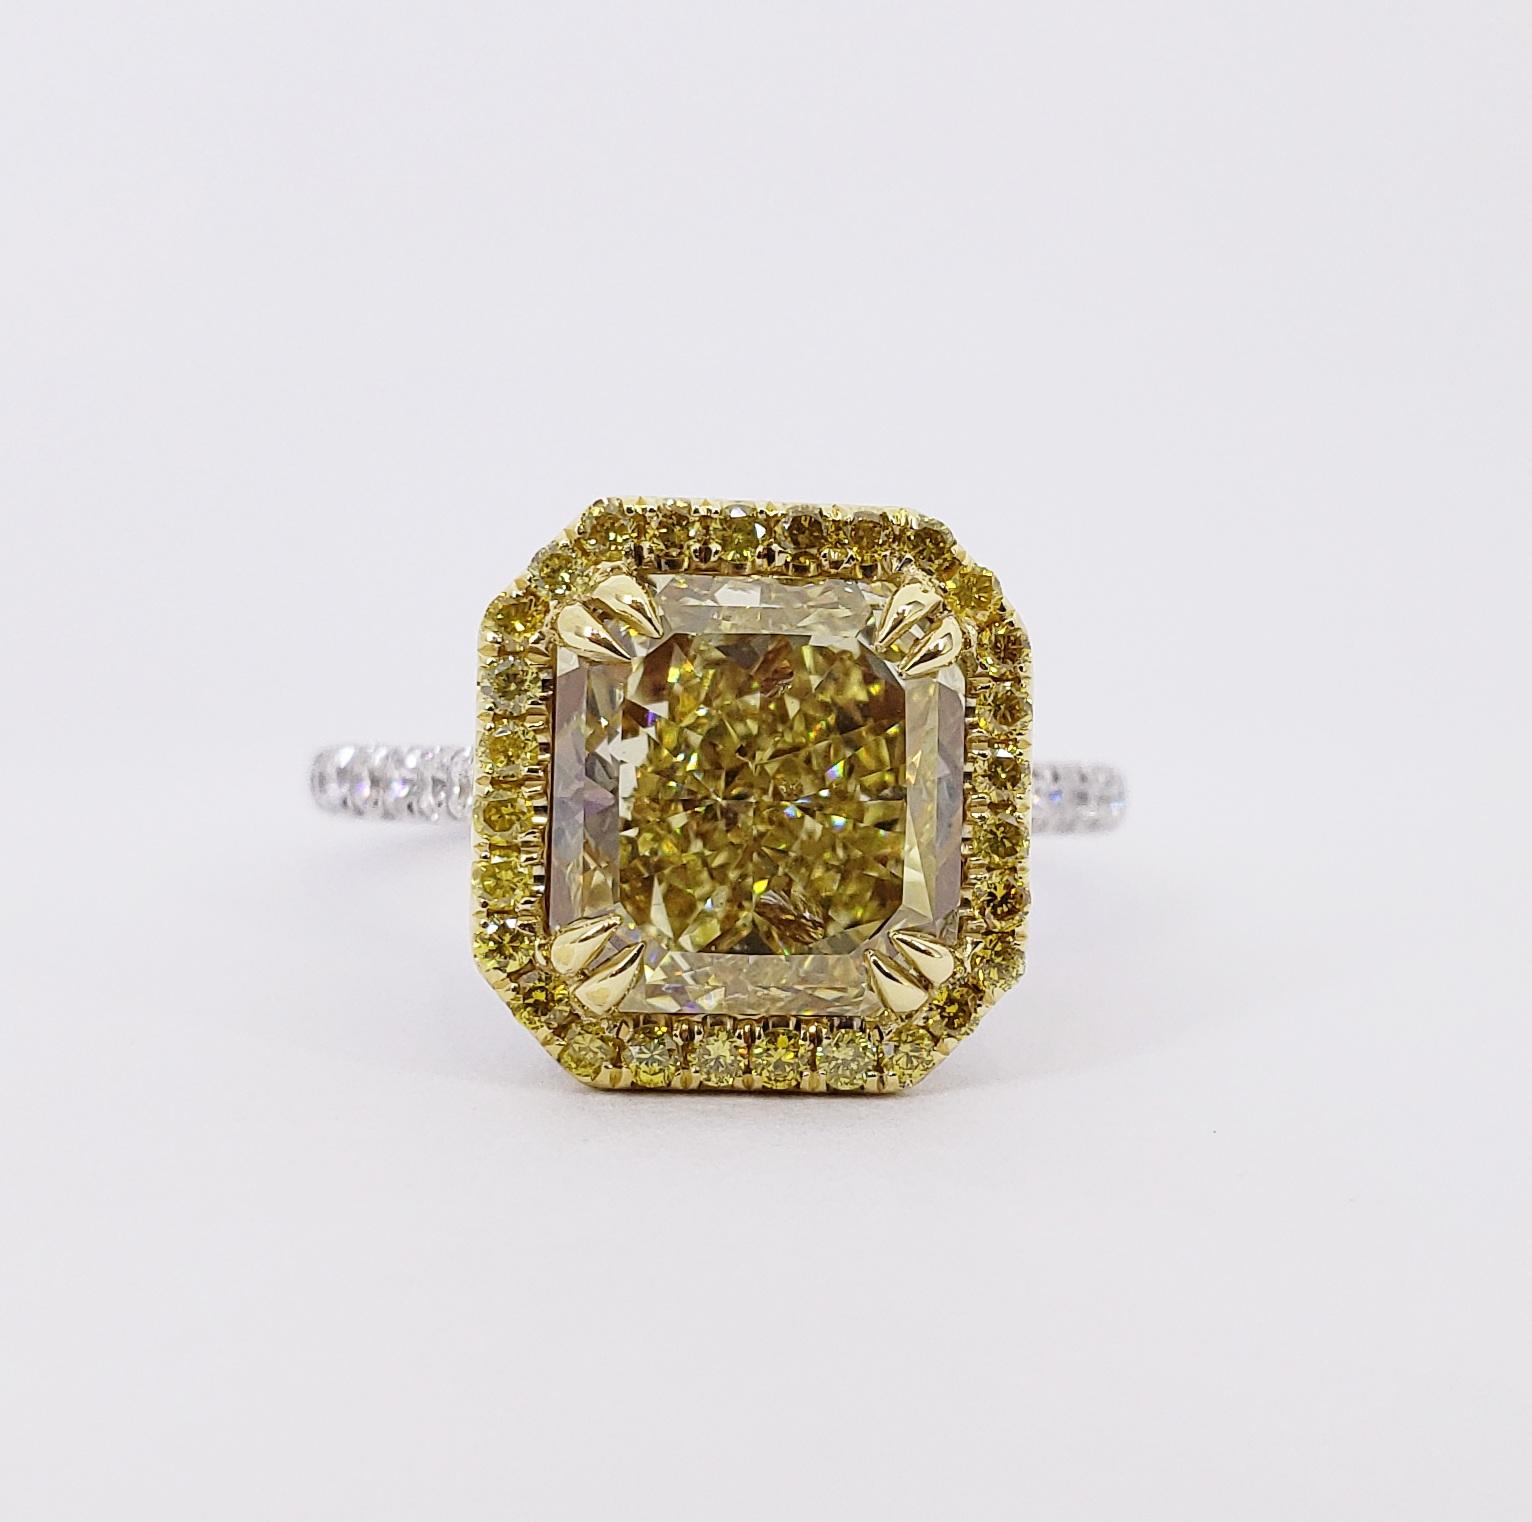 Rosenberg Diamonds & Co. 4.03 carat Radiant cut Fancy Intense Yellow VS2 clarity is accompanied by a GIA certificate. This striking Radiant is full of brilliance and it is set in a handmade 18 karat white & yellow gold setting. This ring completes